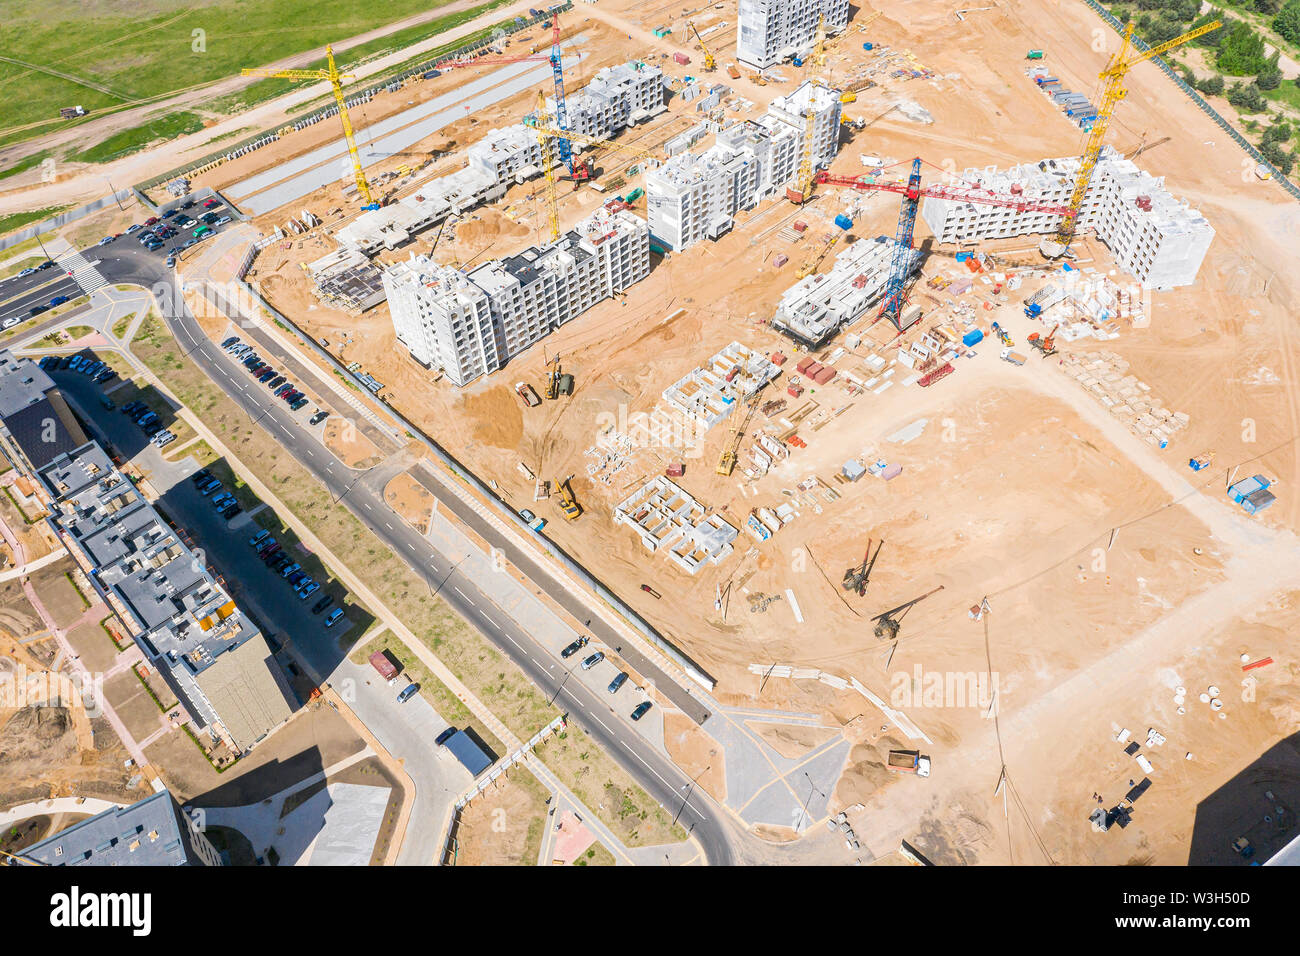 aerial view of new residential area with multistory modern apartment buildings under construction Stock Photo